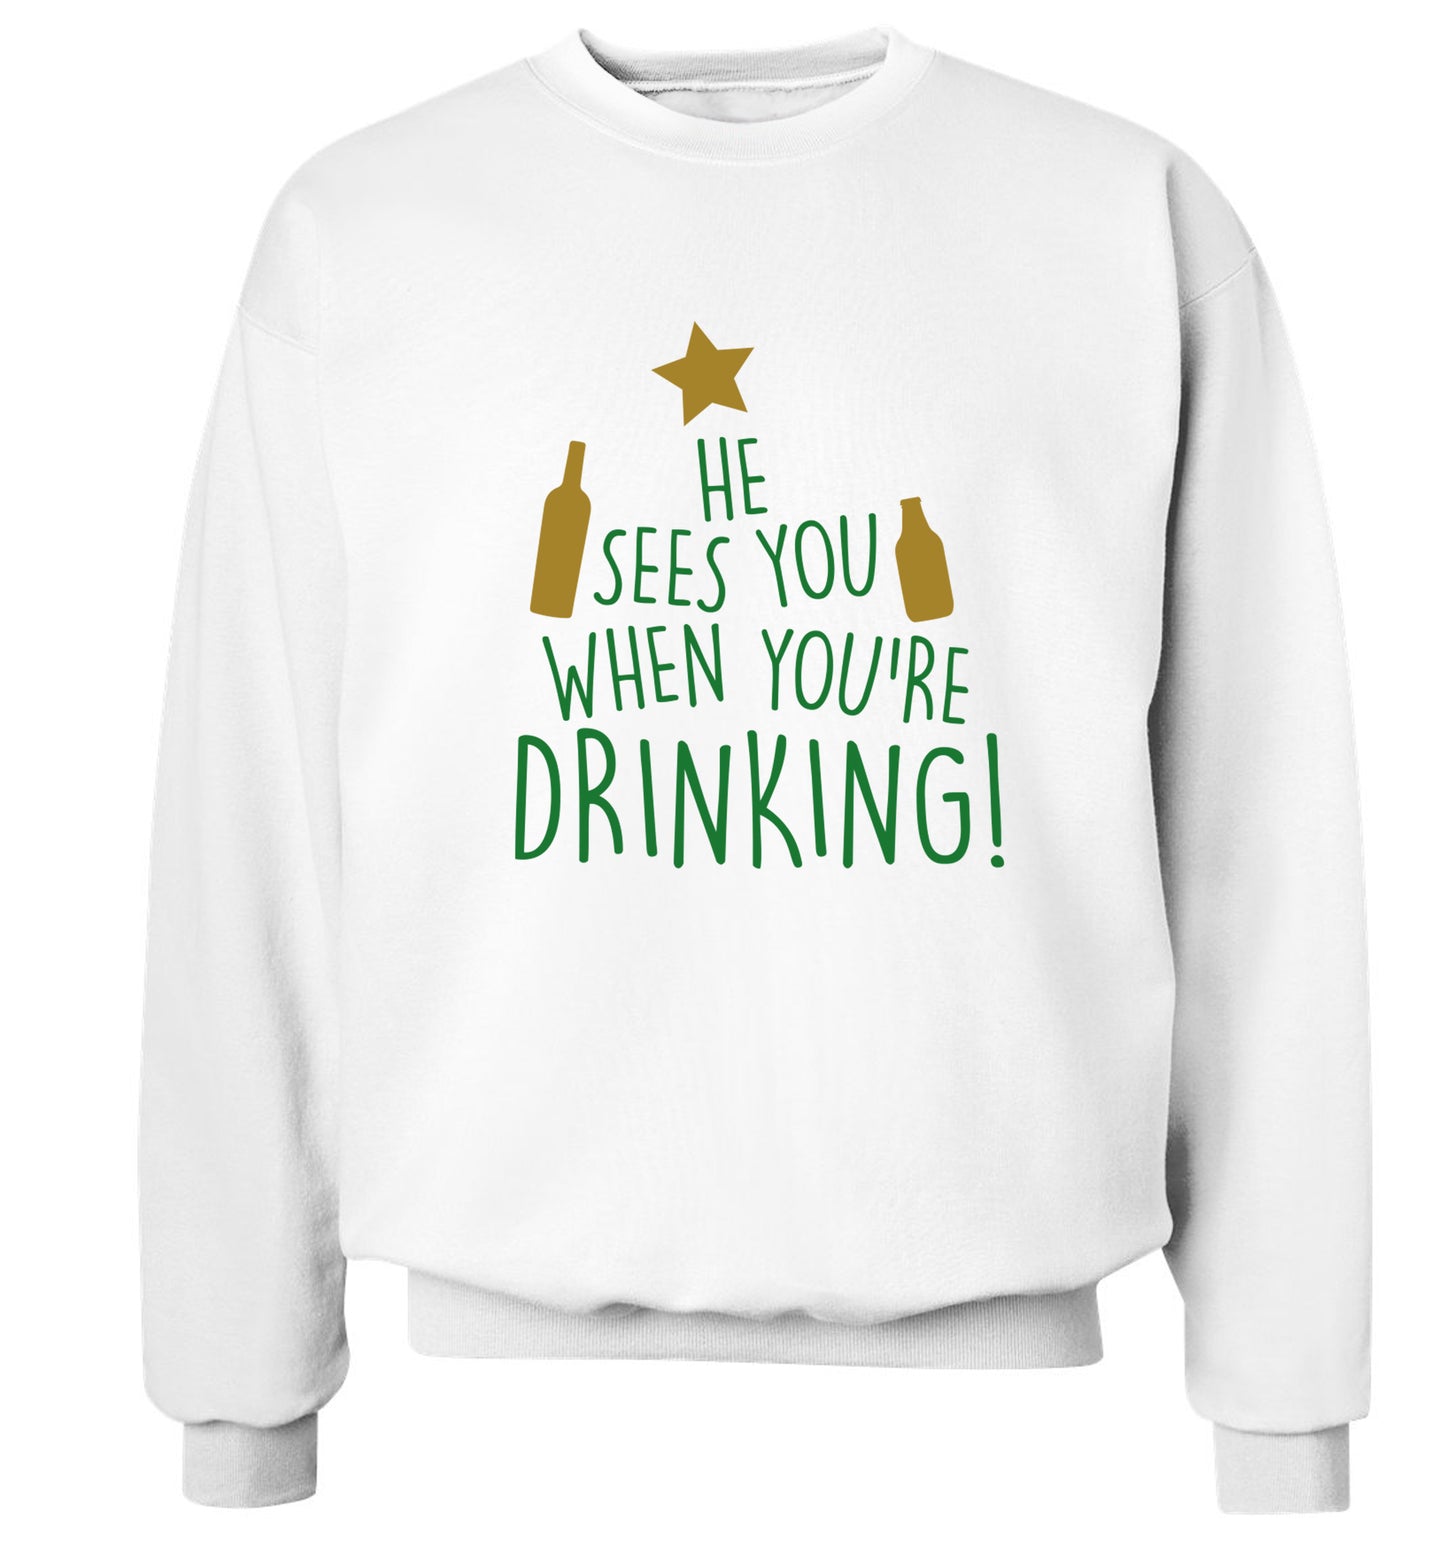 He sees you when you're drinking Adult's unisex white Sweater 2XL